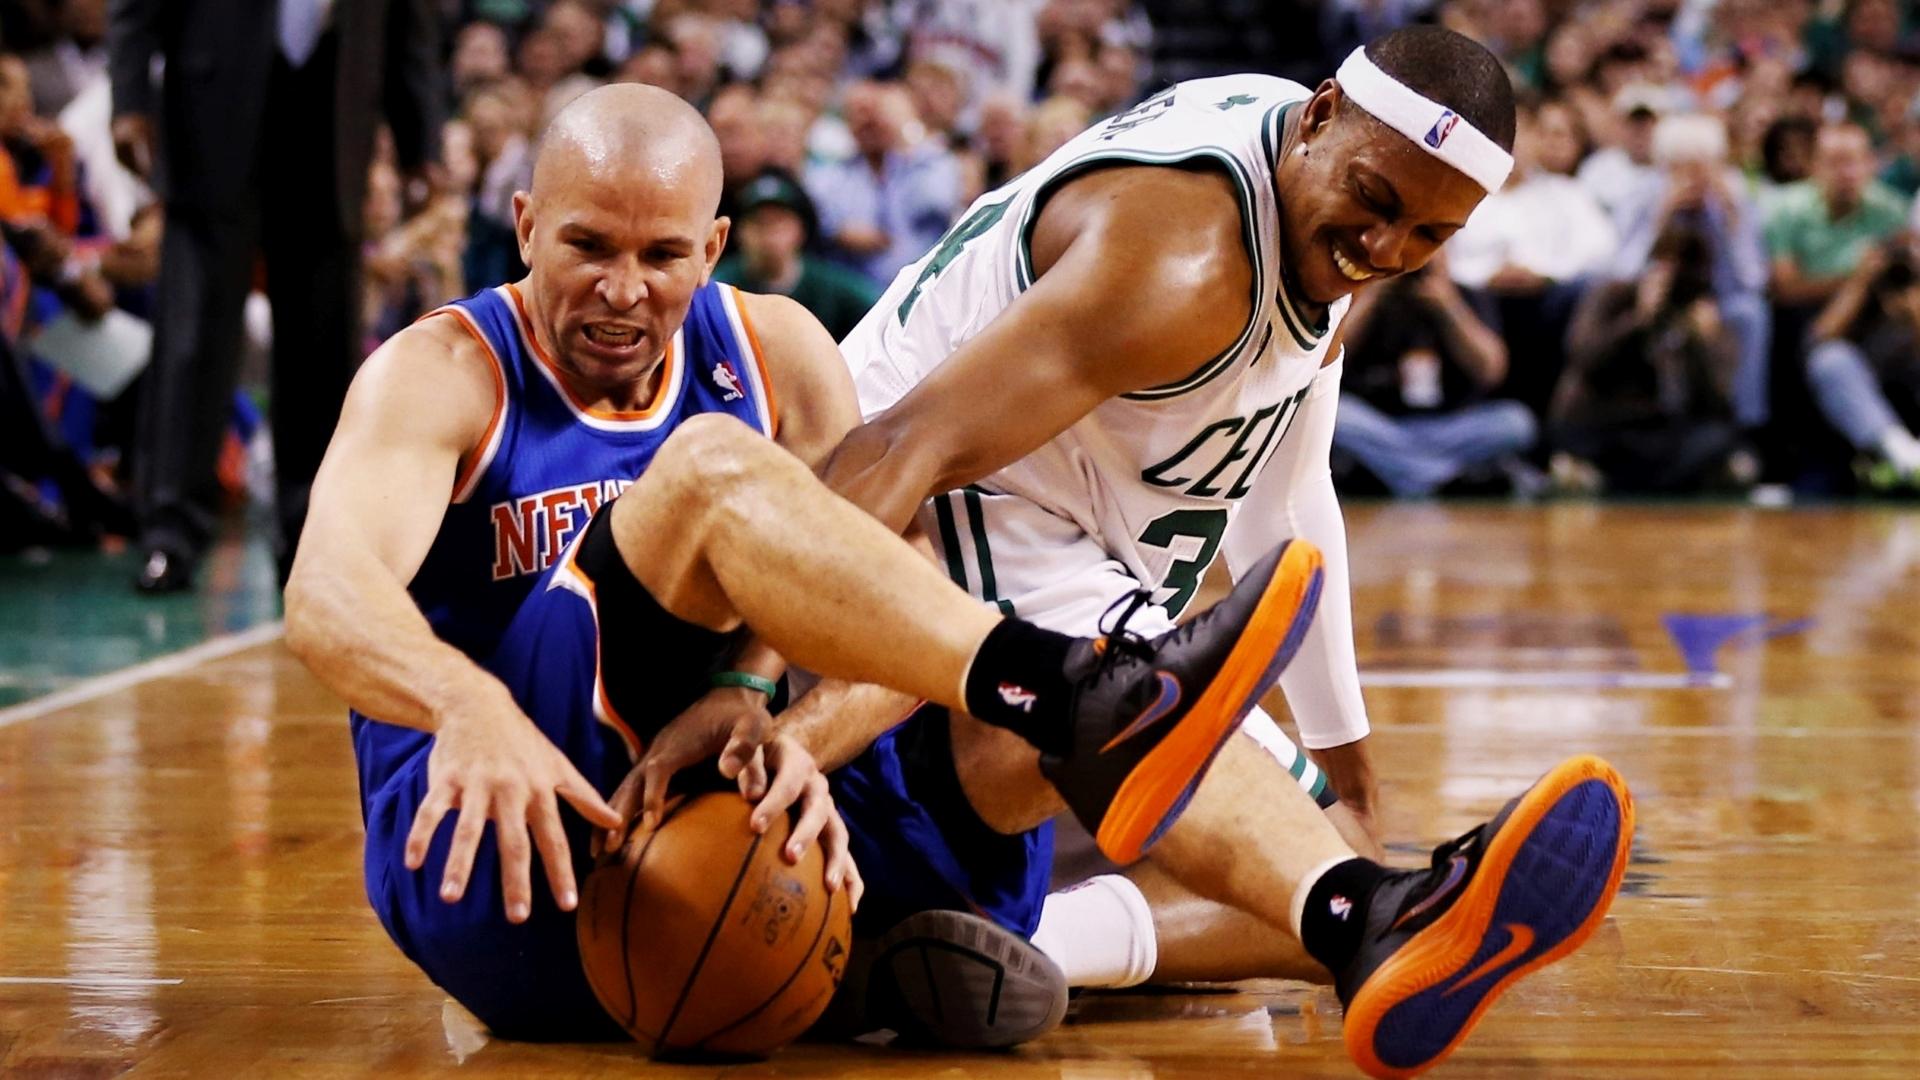 May 3, 2013; Boston, MA, USA; Boston Celtics small forward Paul Pierce (34) and New York Knicks point guard Jason Kidd (5) fight for the loose ball in game six of the first round of the 2013 NBA Playoffs at TD Garden. Mandatory Credit: David Butler II-USA TODAY Sports / © David Butler II-USA TODAY Sports